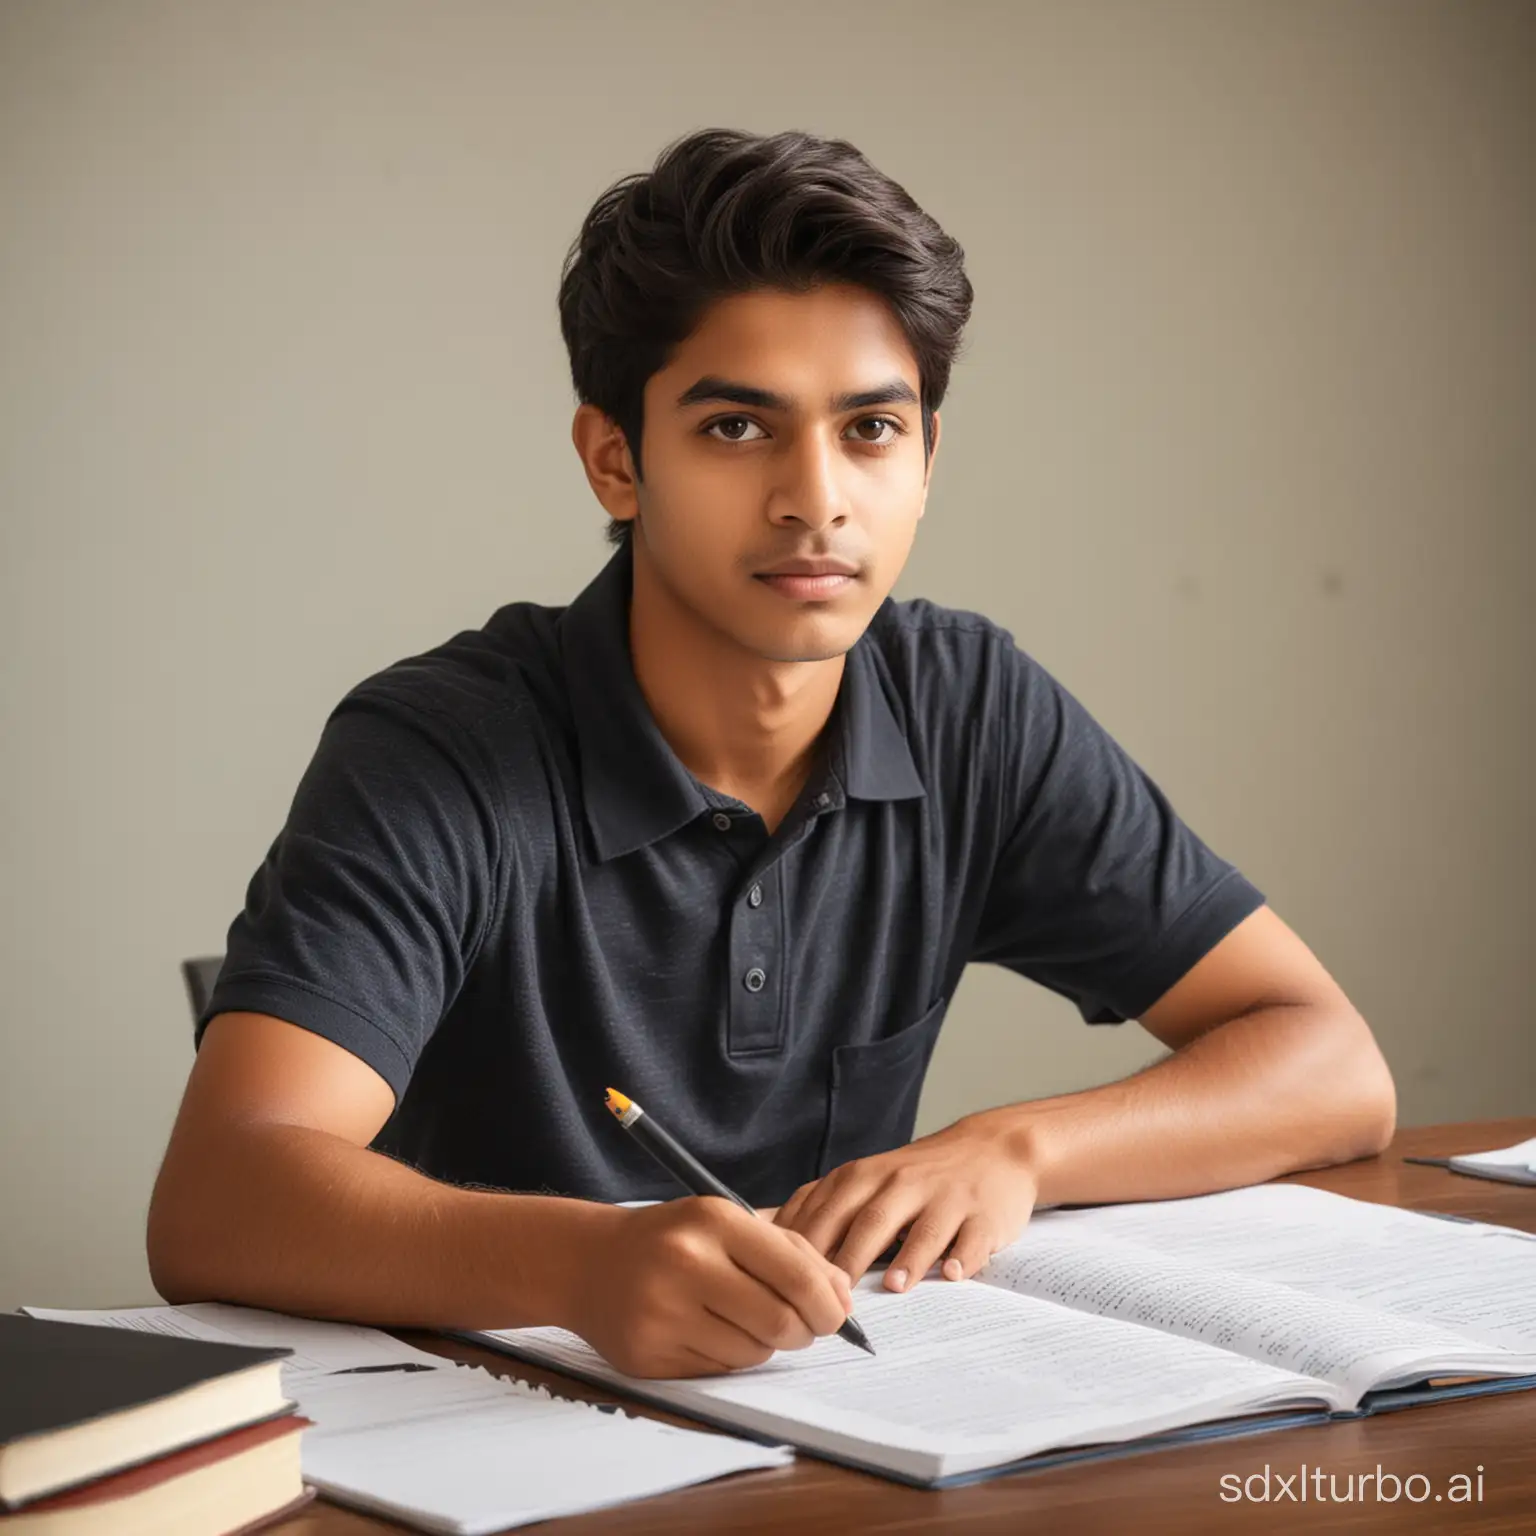 Young-Indian-Man-Studying-at-Desk